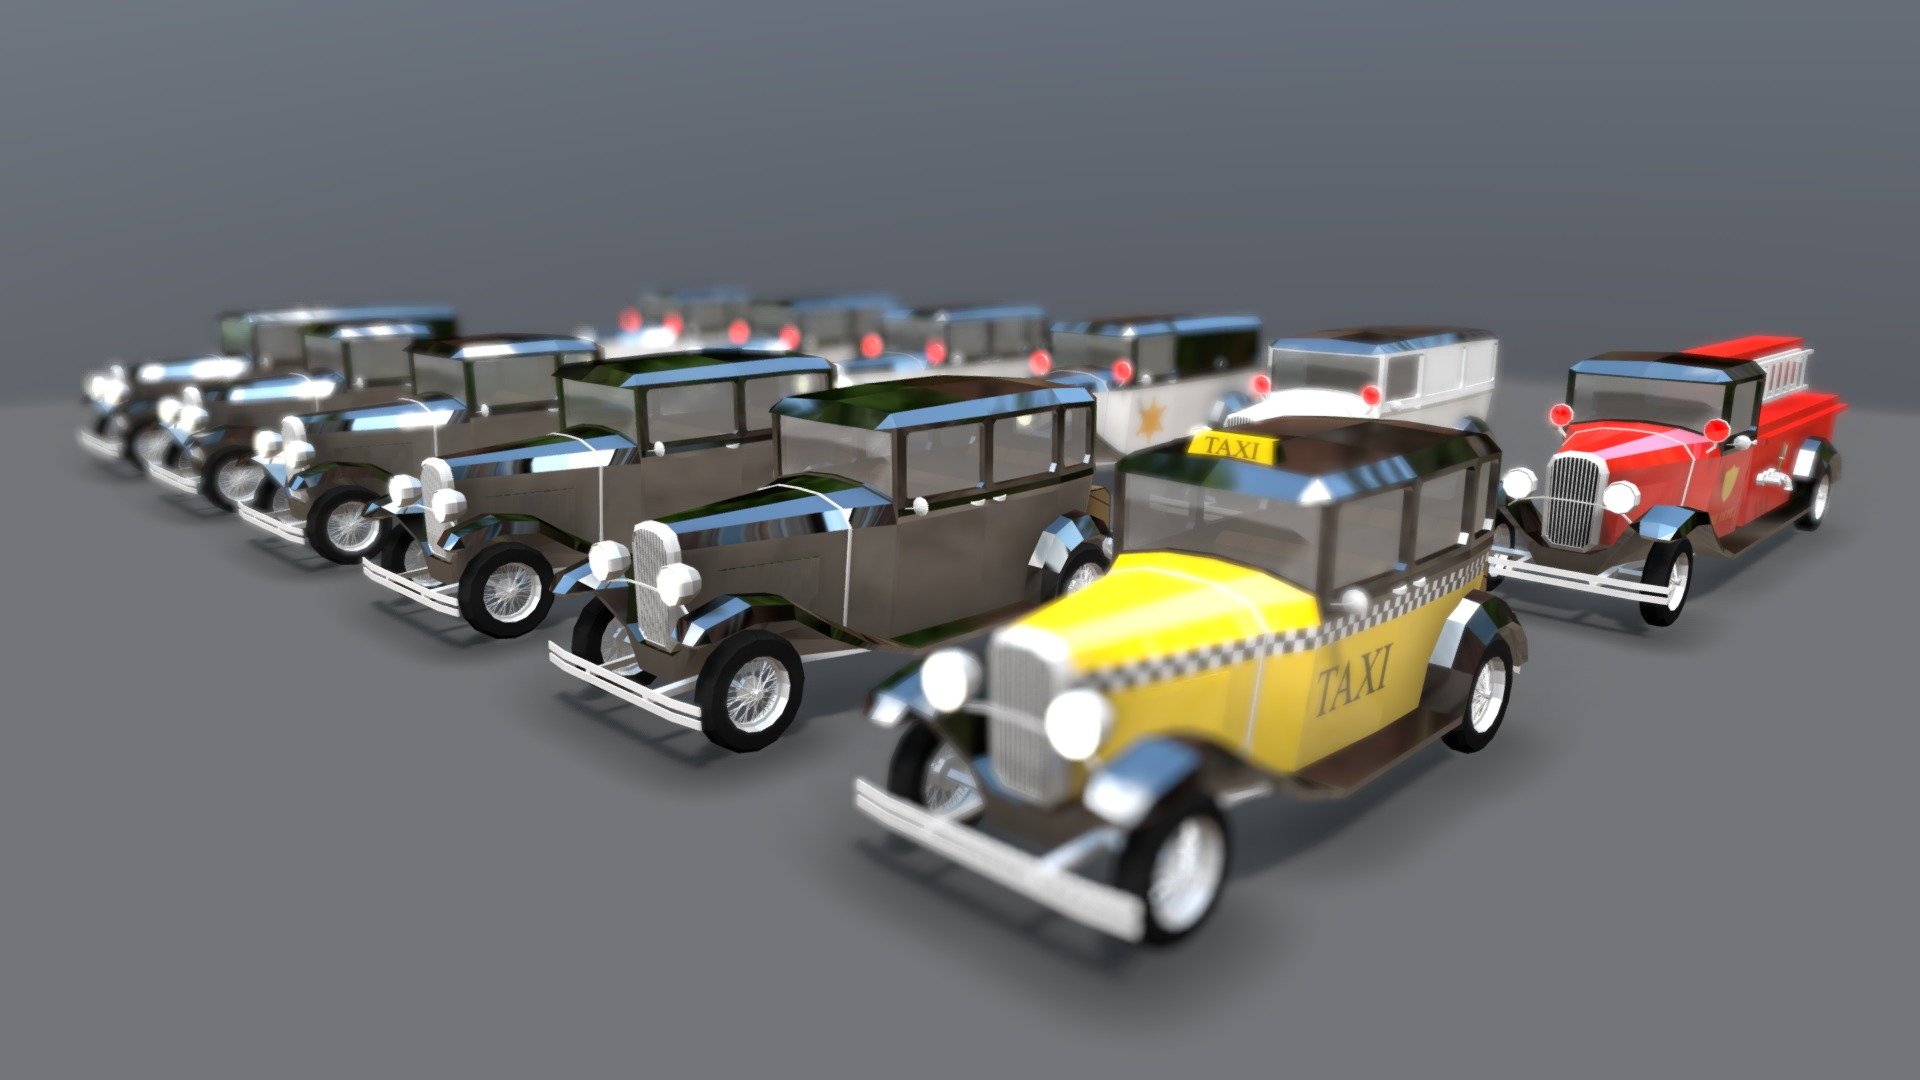 This car pack represents cars from the 1930’.

It features a emergency vehicles and a bunch of normal ordinary citizen vehicles.

Doors, windows and tires are separate models, so this pack is very suitable for GTA like style games.

It can be downloaded on the Unity Asset Store for 24.99 USD 3d model